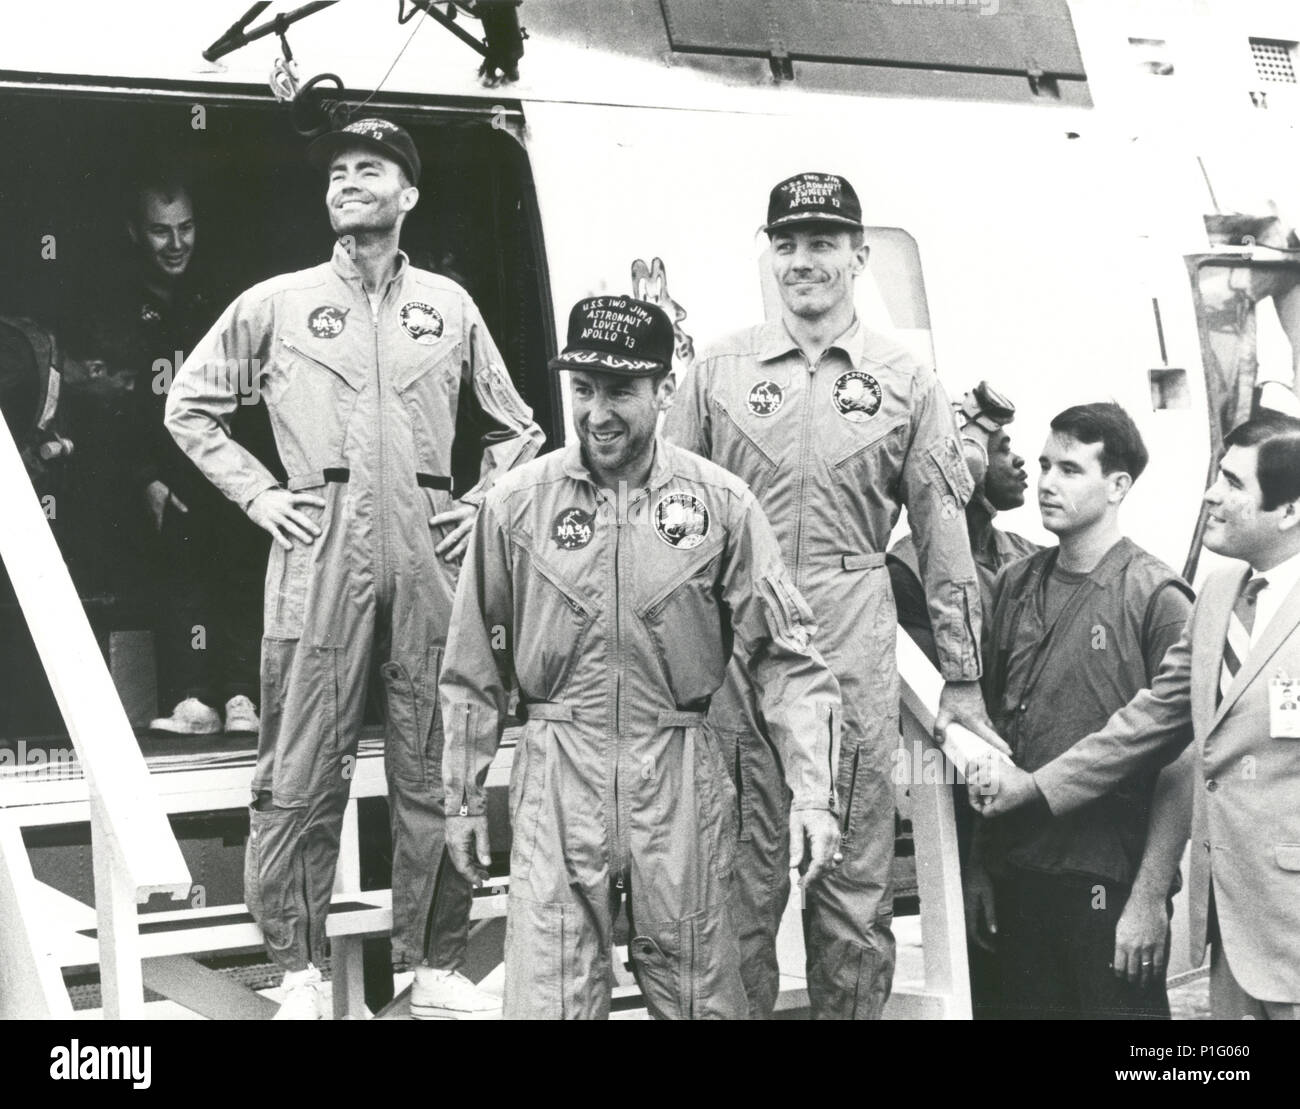 The crew of the Apollo 13 mission step aboard the U.S.S. Iwo Jima, prime recovery ship for the mission, following splashdown and recovery operations in the South Pacific. Exiting the helicopter (from left) astronauts Fred. W. Haise, Jr., lunar module pilot; James A. Lovell Jr., commander; and John L. Swigert Jr., command module pilot. The Apollo 13 spacecraft splashed down at 12:07:44 pm CST on April 17, 1970. Stock Photo